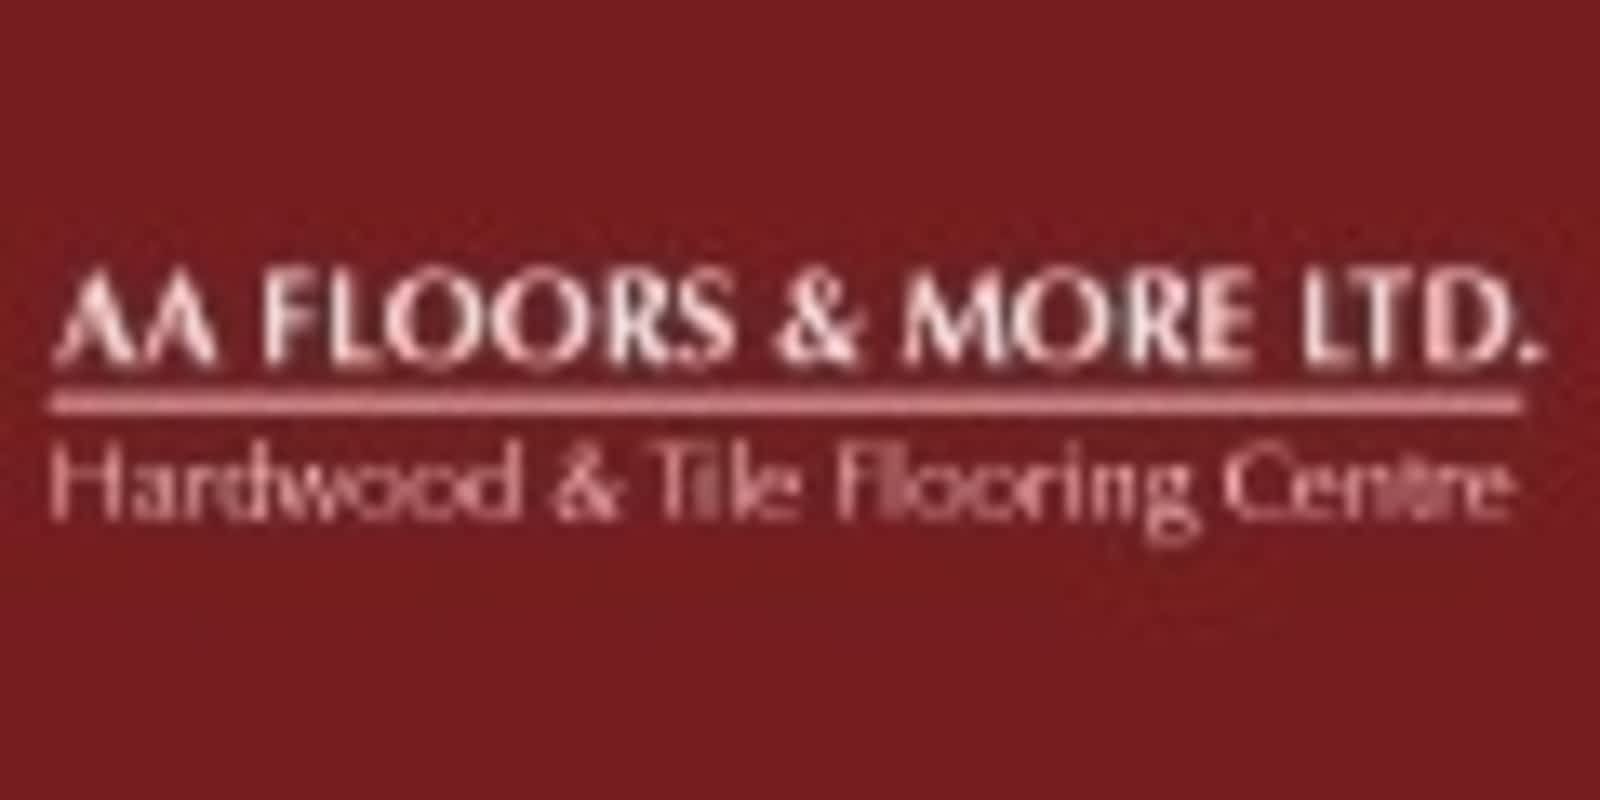 25 Popular Hardwood Floor Refinishing Long Beach Ca 2024 free download hardwood floor refinishing long beach ca of aa floors and more opening hours 524 evans ave etobicoke on in aa floors and more 1